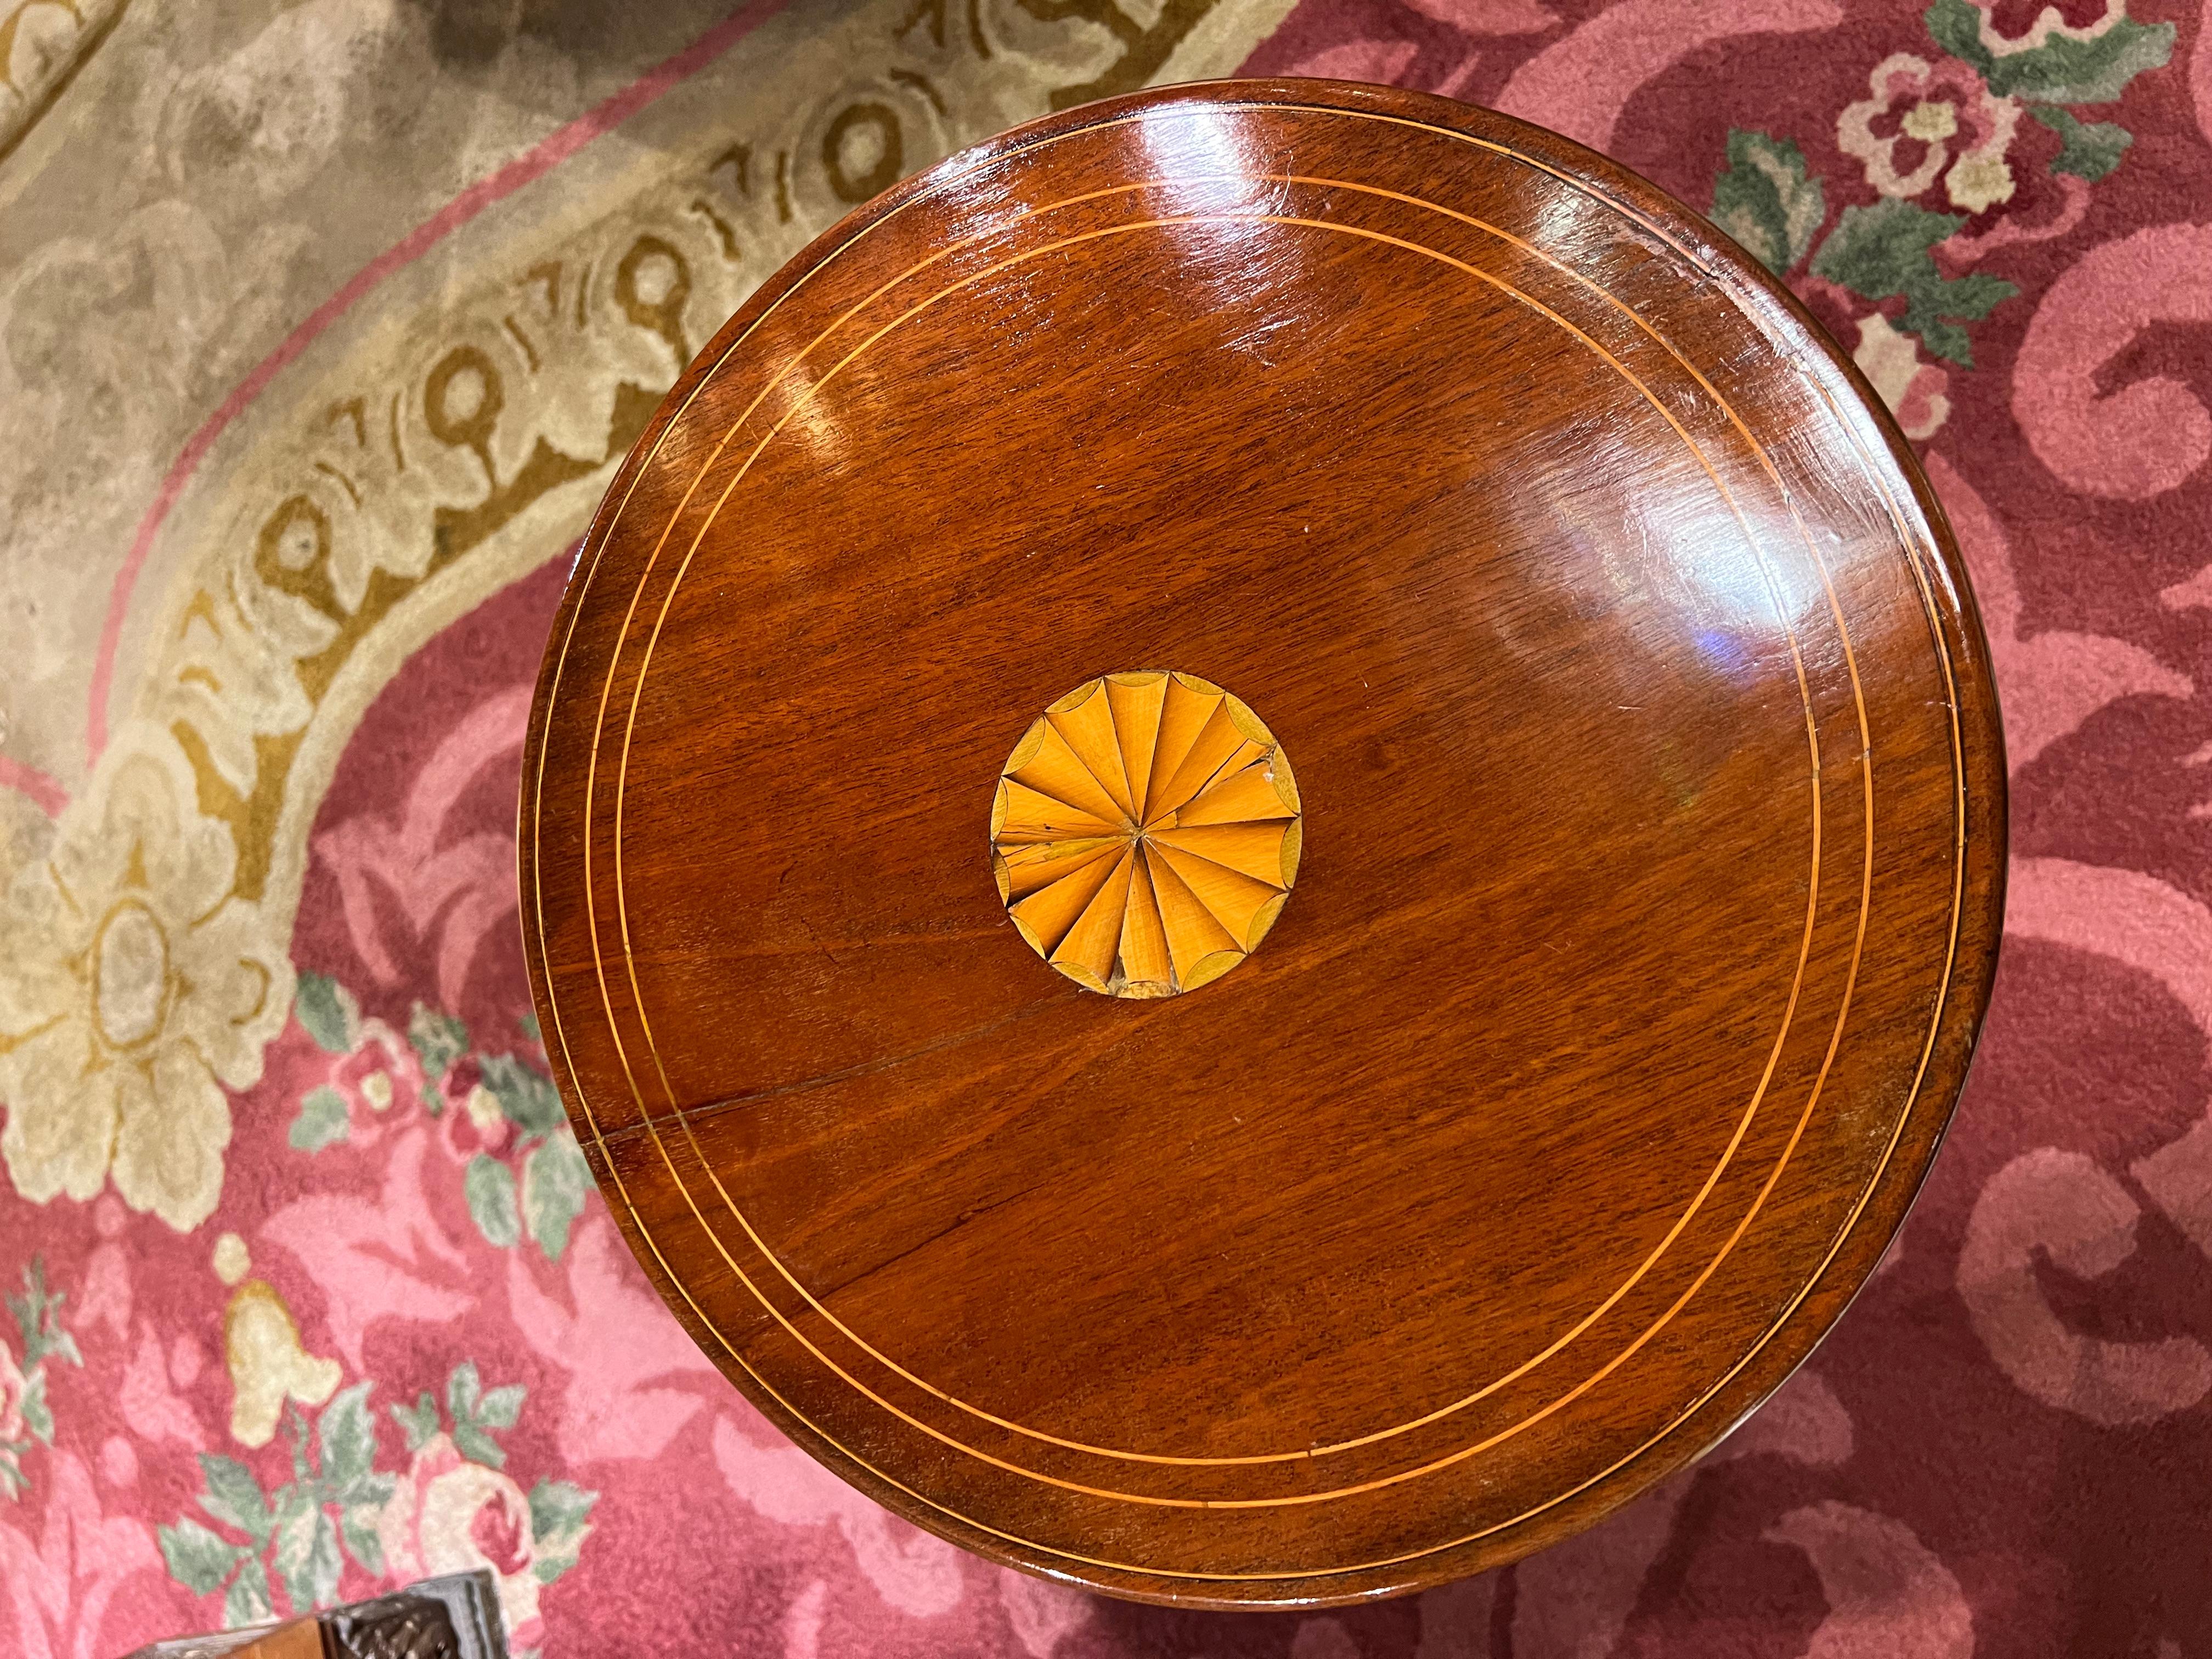 Beautiful round side table mahogany 
beautiful original condition, all hand-polished with shellac
inside everything polished - very clean
Small inlays with shading
Very stable and firmly glued.